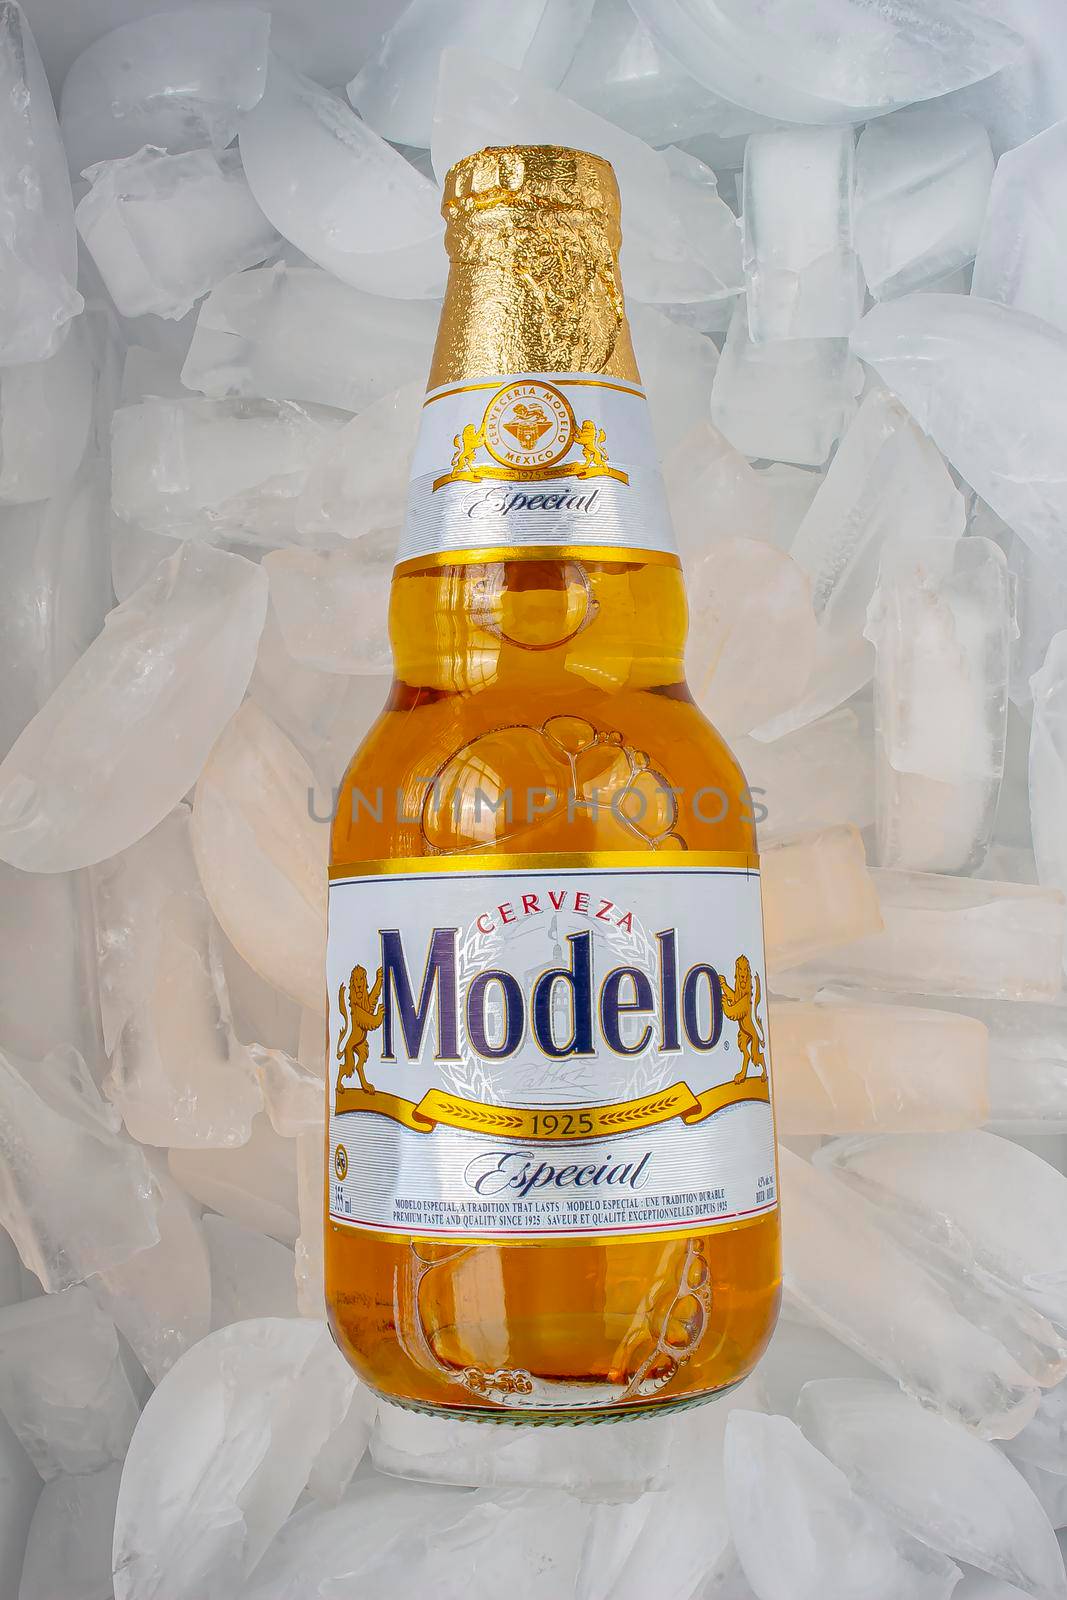 Calgary, Alberta, Canada. May 1, 2020. Modelo Especial beer bottle clear bright yellow colour on ice